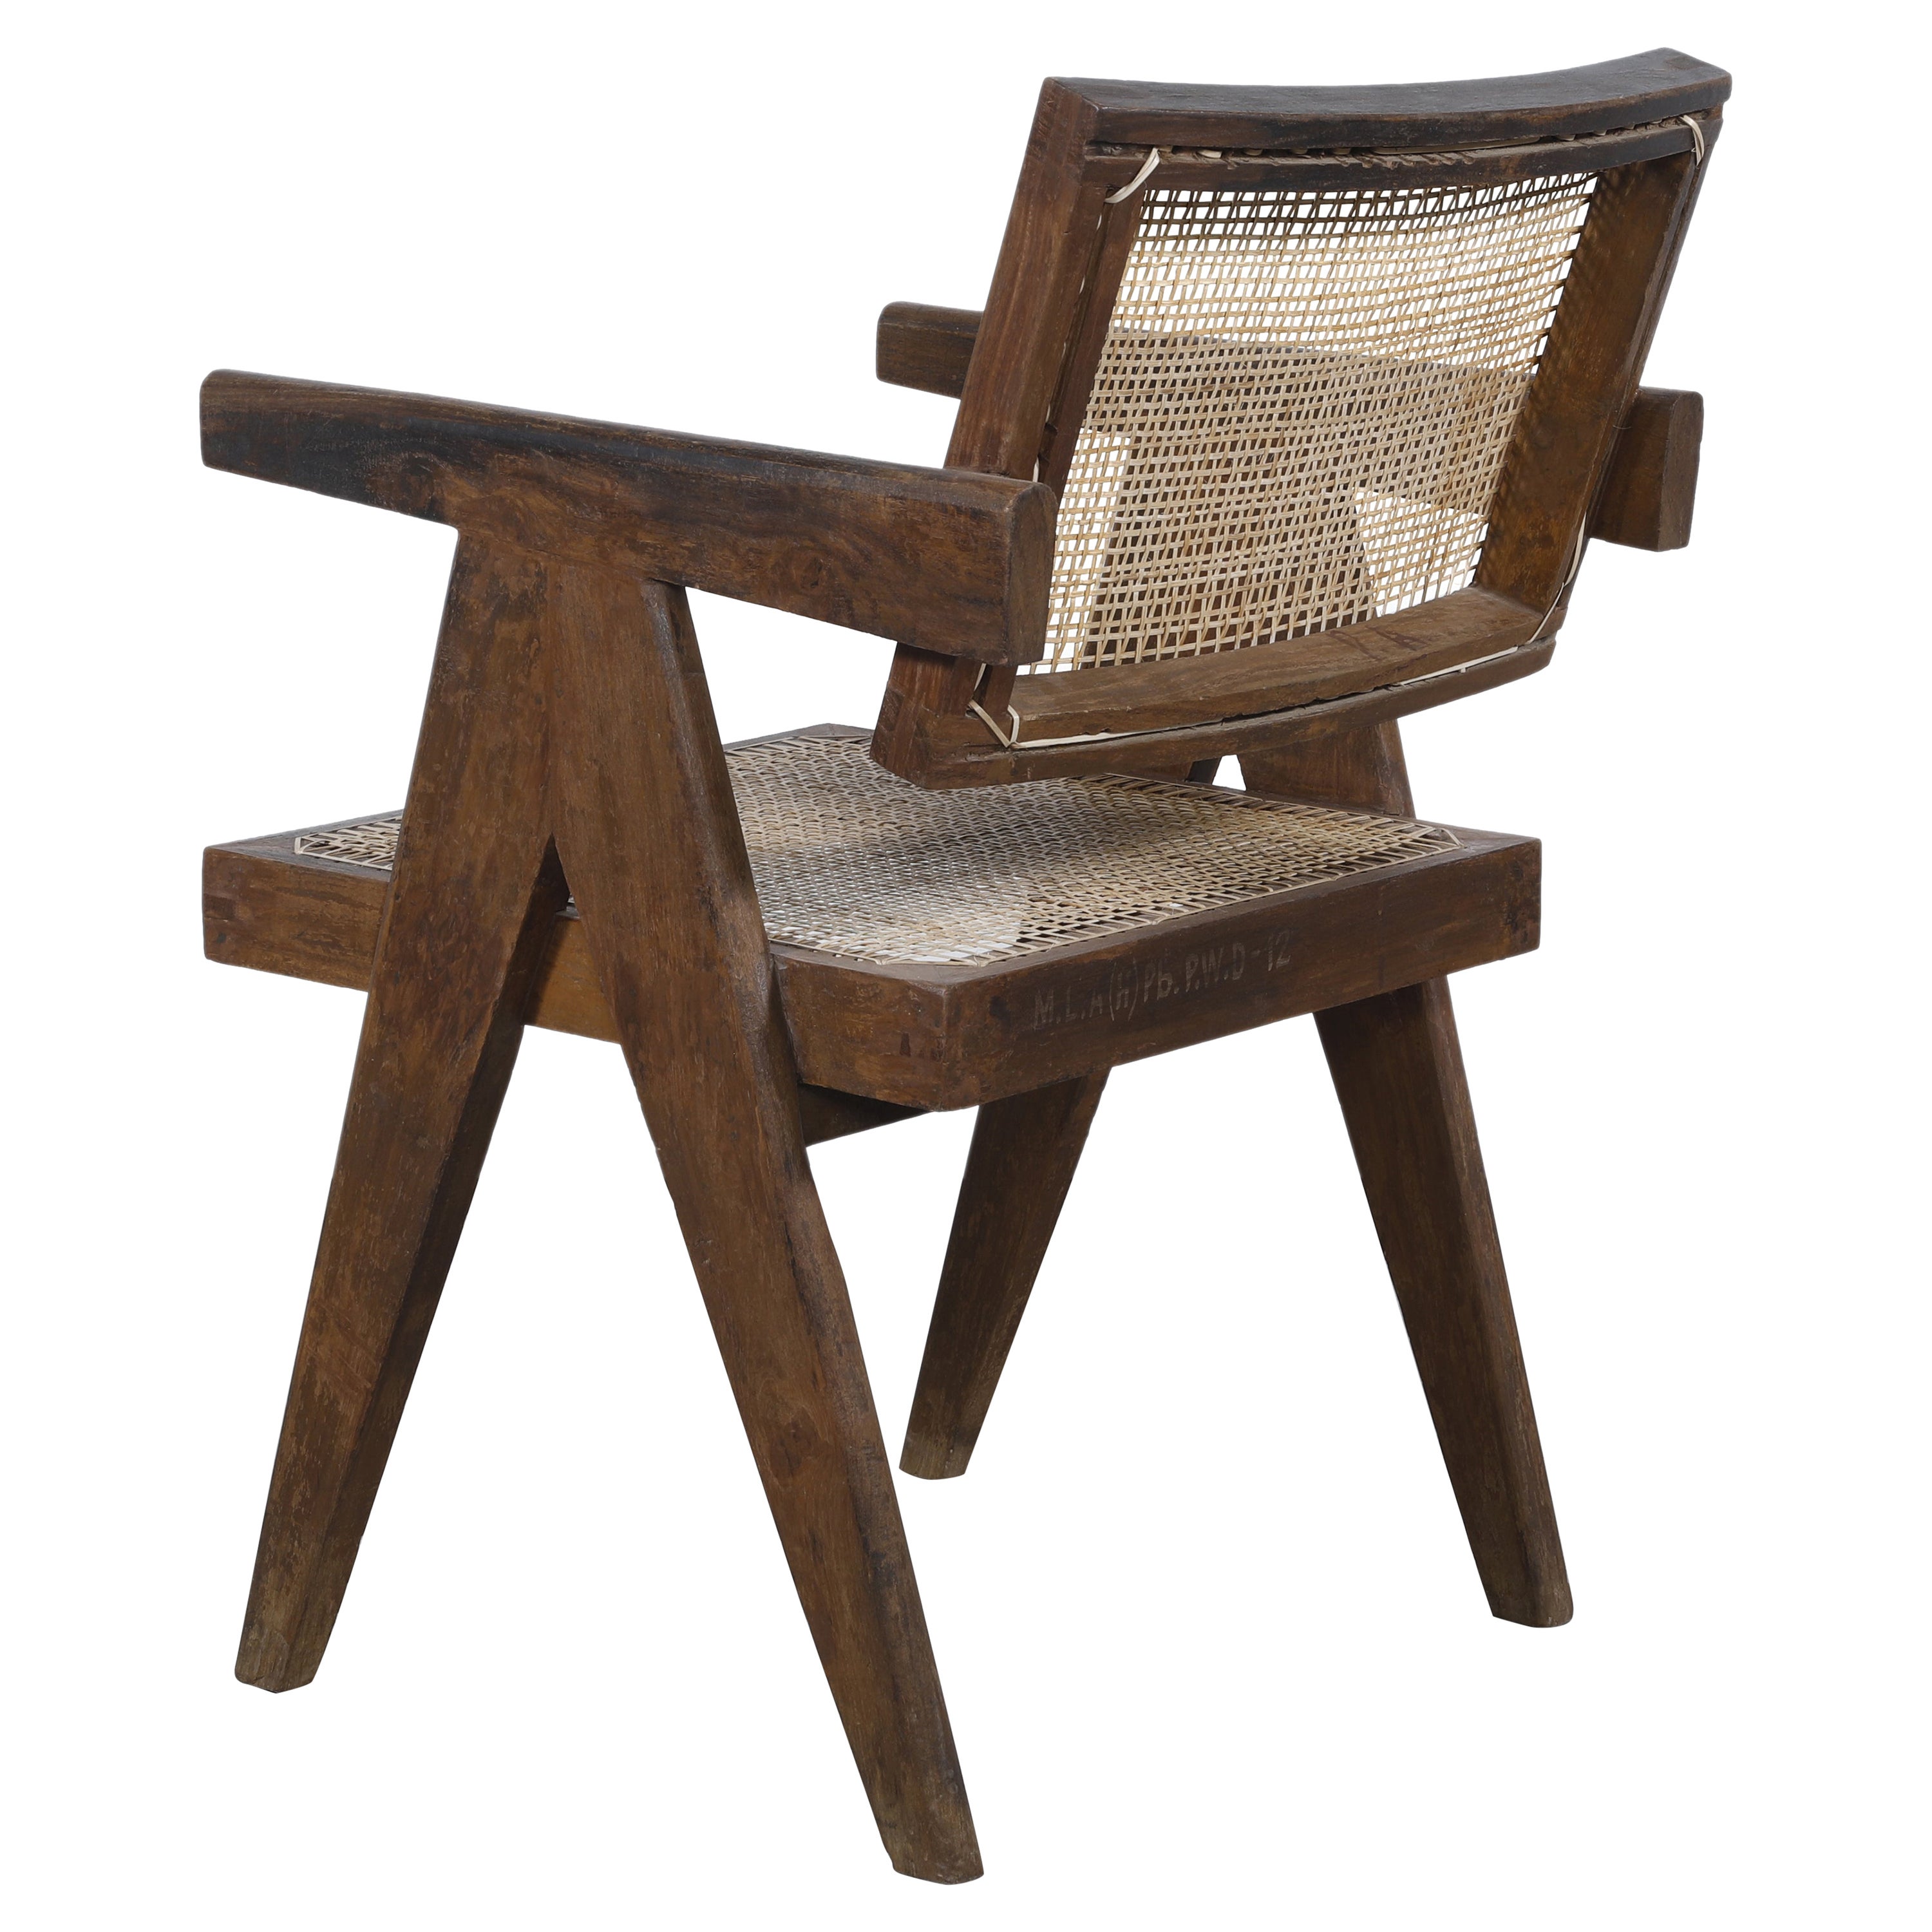 Pierre Jeanneret Office Cane Chair with letters  Authentic Mid-Century Modern